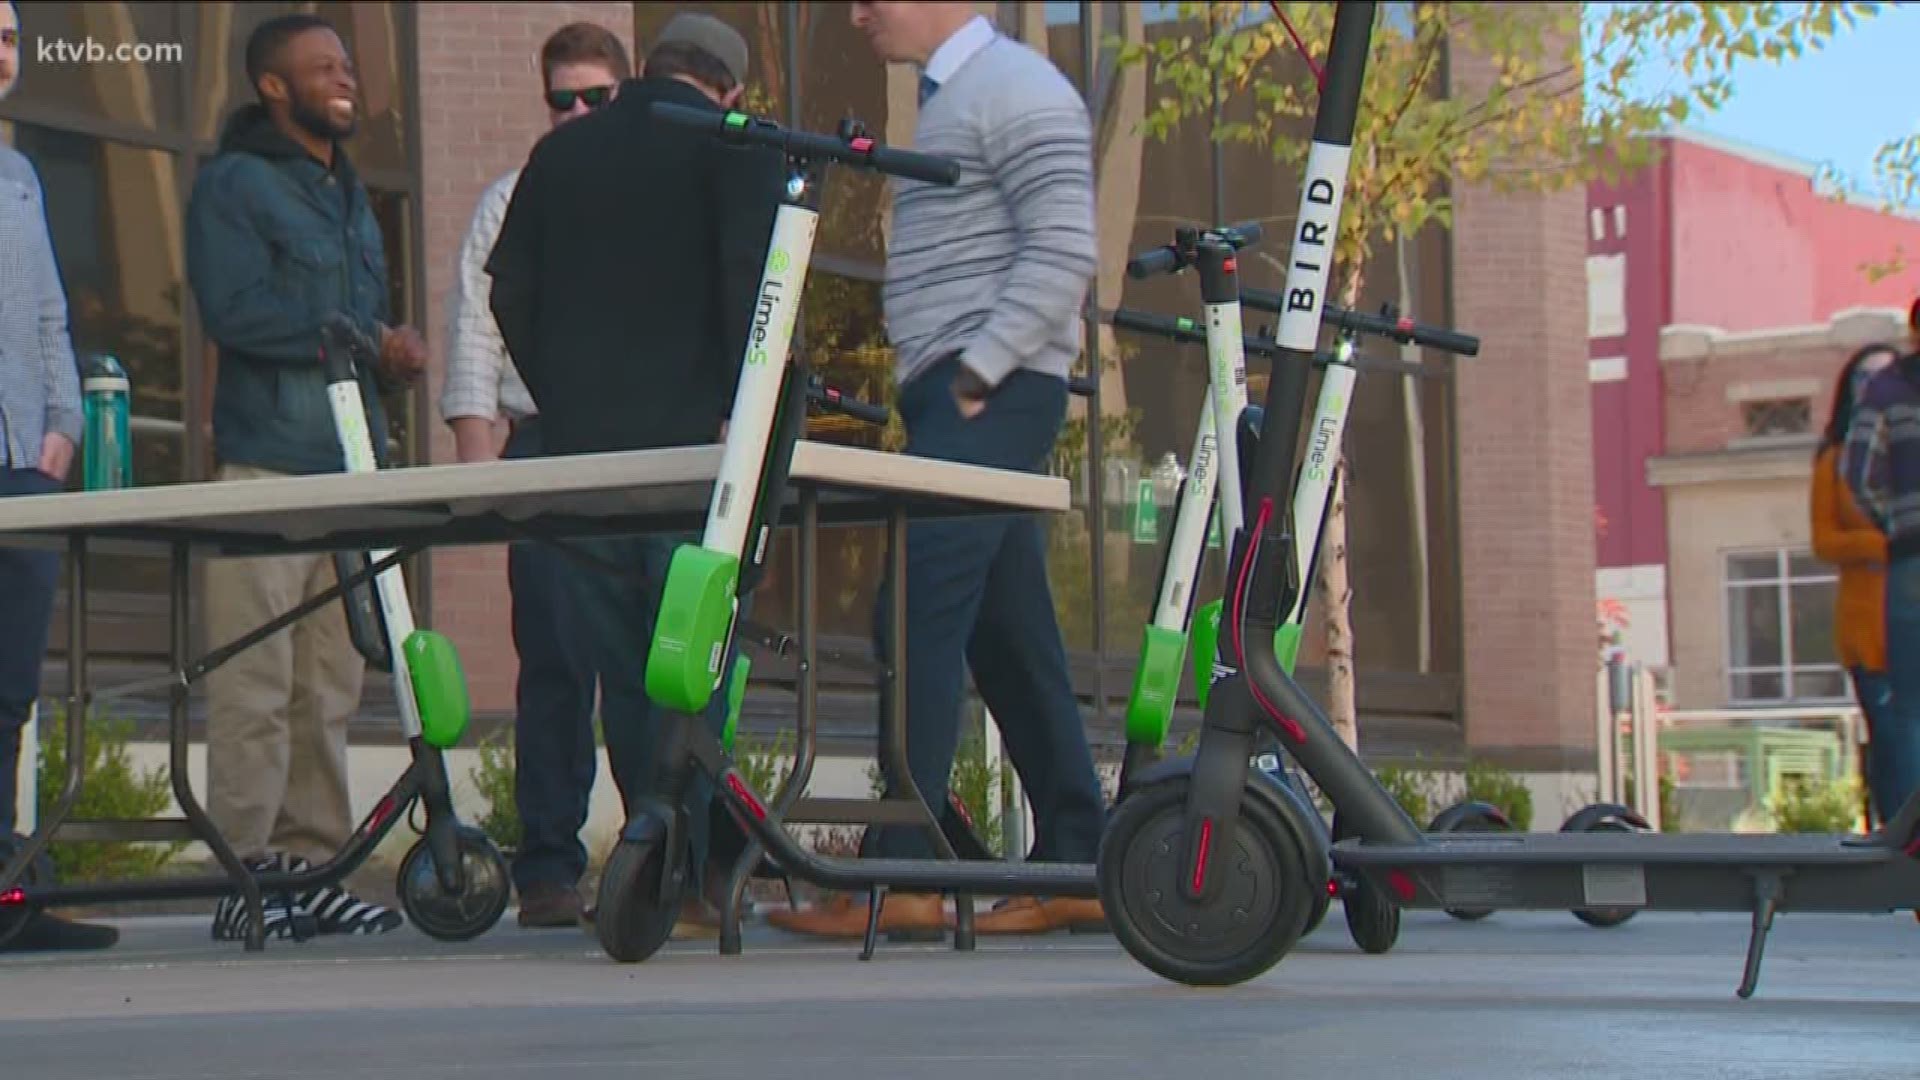 The scooters are expected to hit the streets of Boise soon.